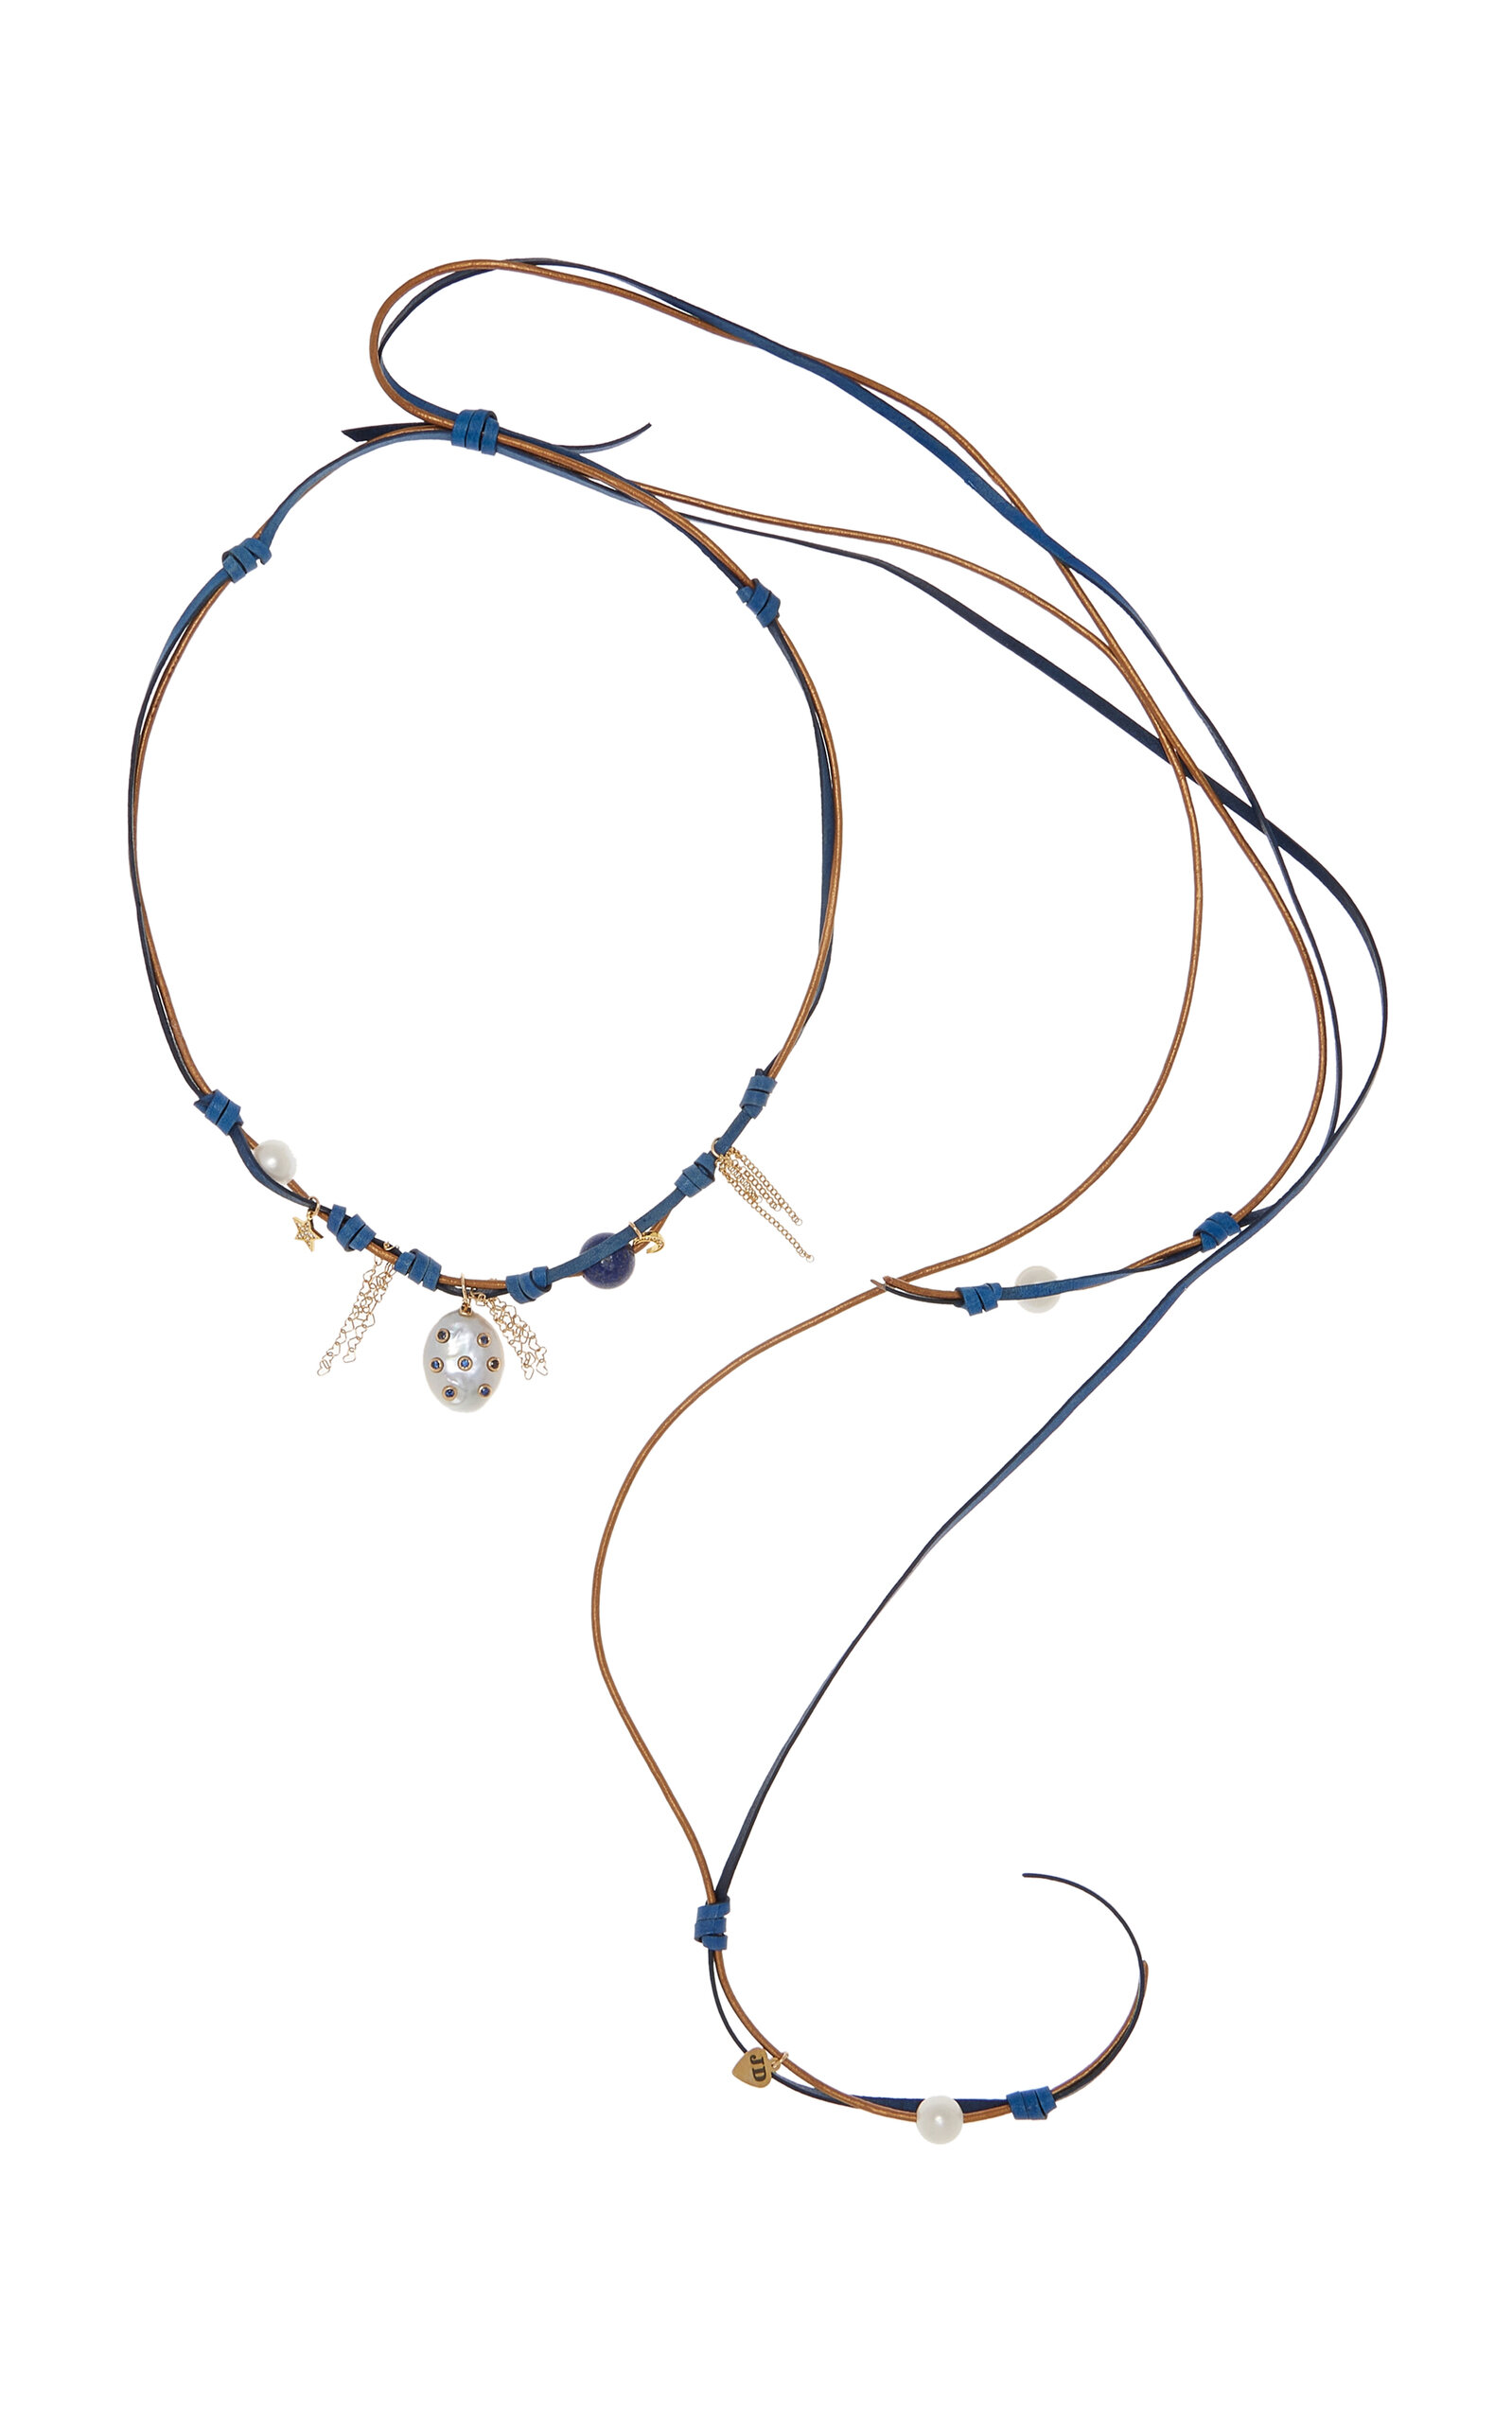 Joie Digiovanni Sparkling Blue Sky Knotted Leather 18k Yellow Gold Pearl; Sapphire; And Lapis Necklace In Black